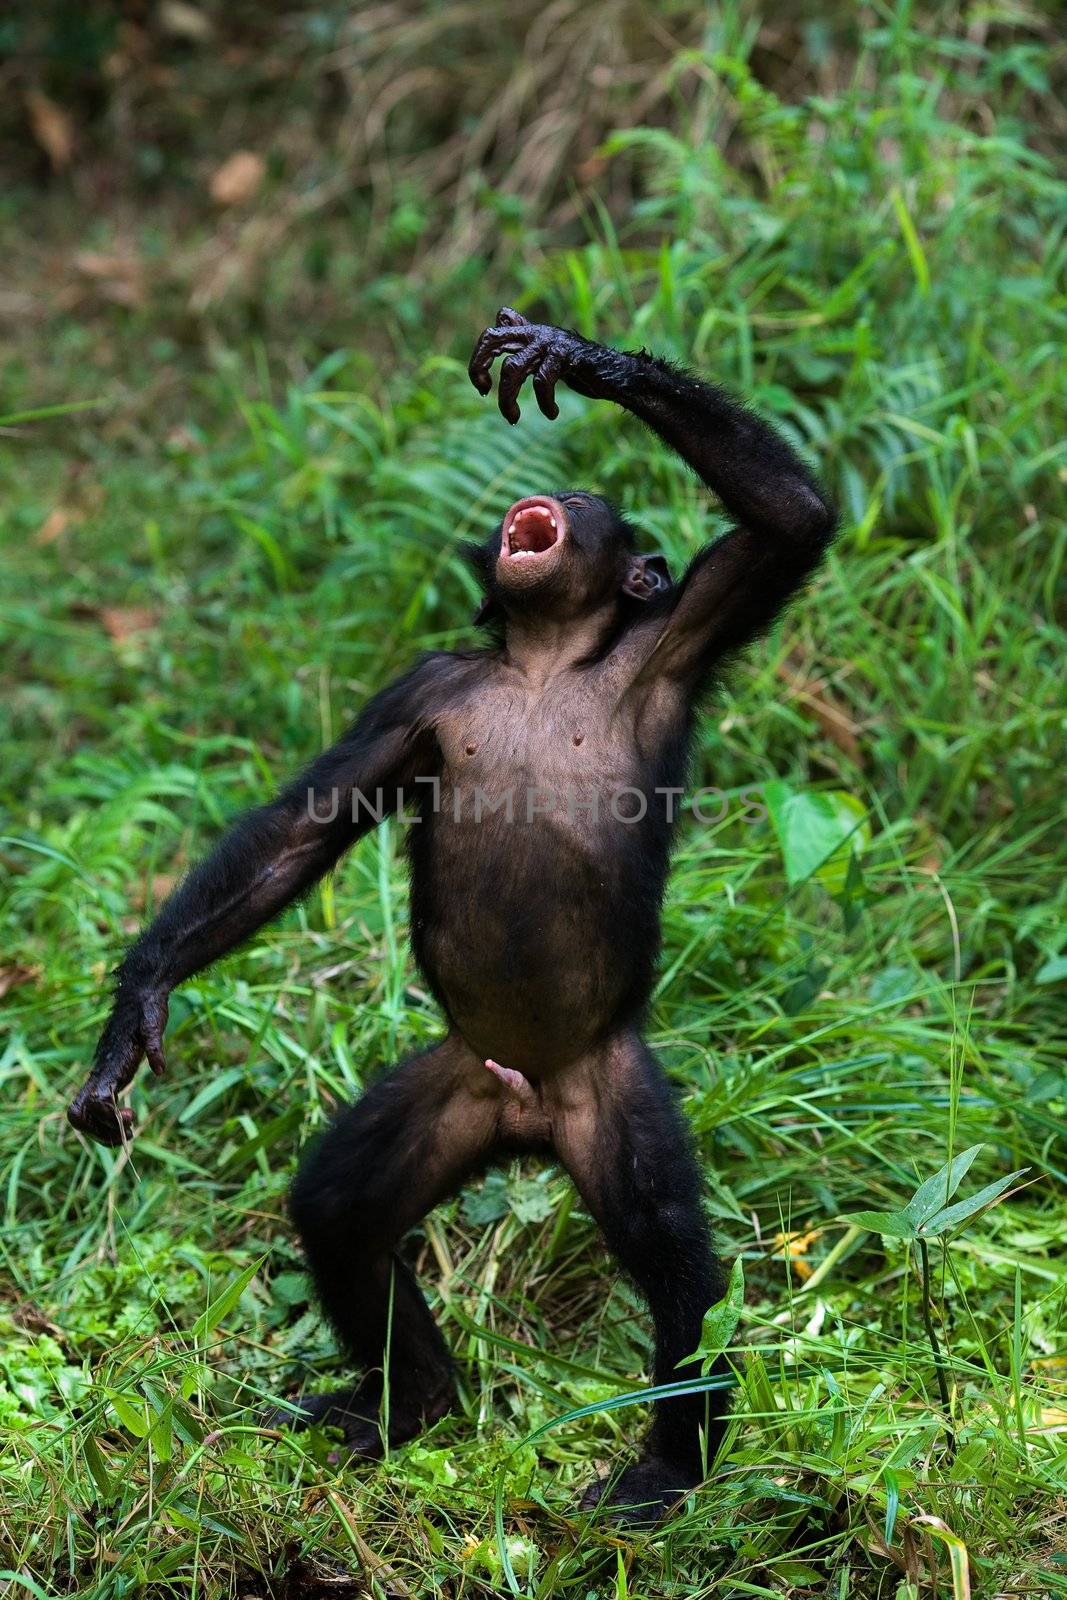 The Bonobo, Pan paniscus, previously called the Pygmy Chimpanzee and less often, the Dwarf or Gracile Chimpanzee, is a great ape and one of the two species making up the genus Pan.